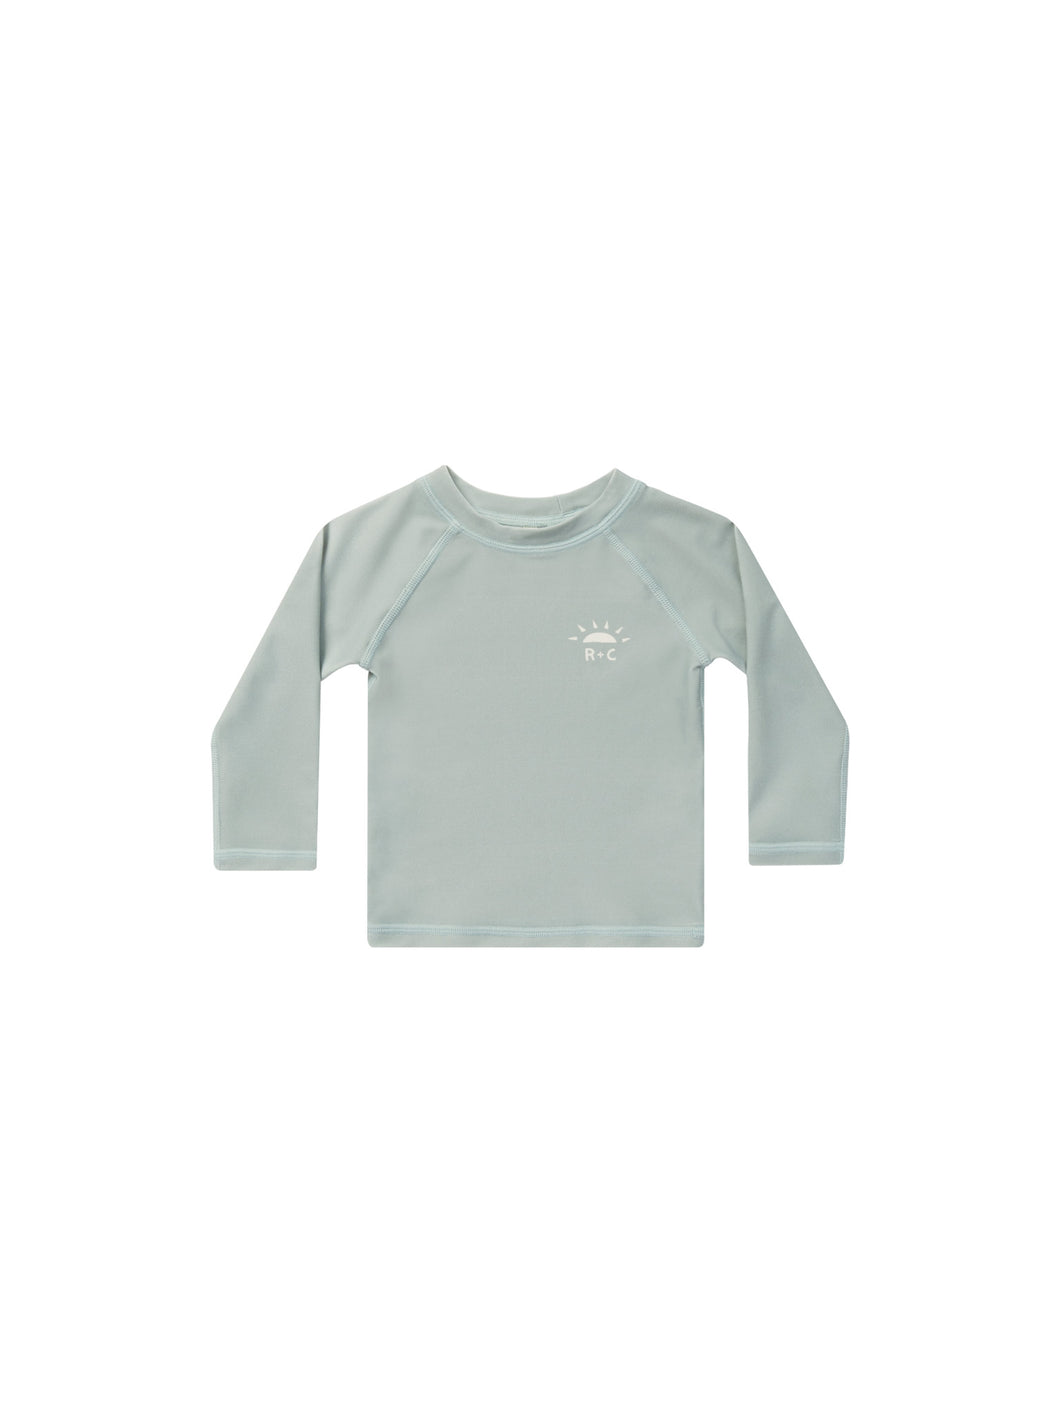 Long Sleeve rash guard in a seafoam colour. This rash guard also features a R + C along with a half sun in the top left corner of front. 